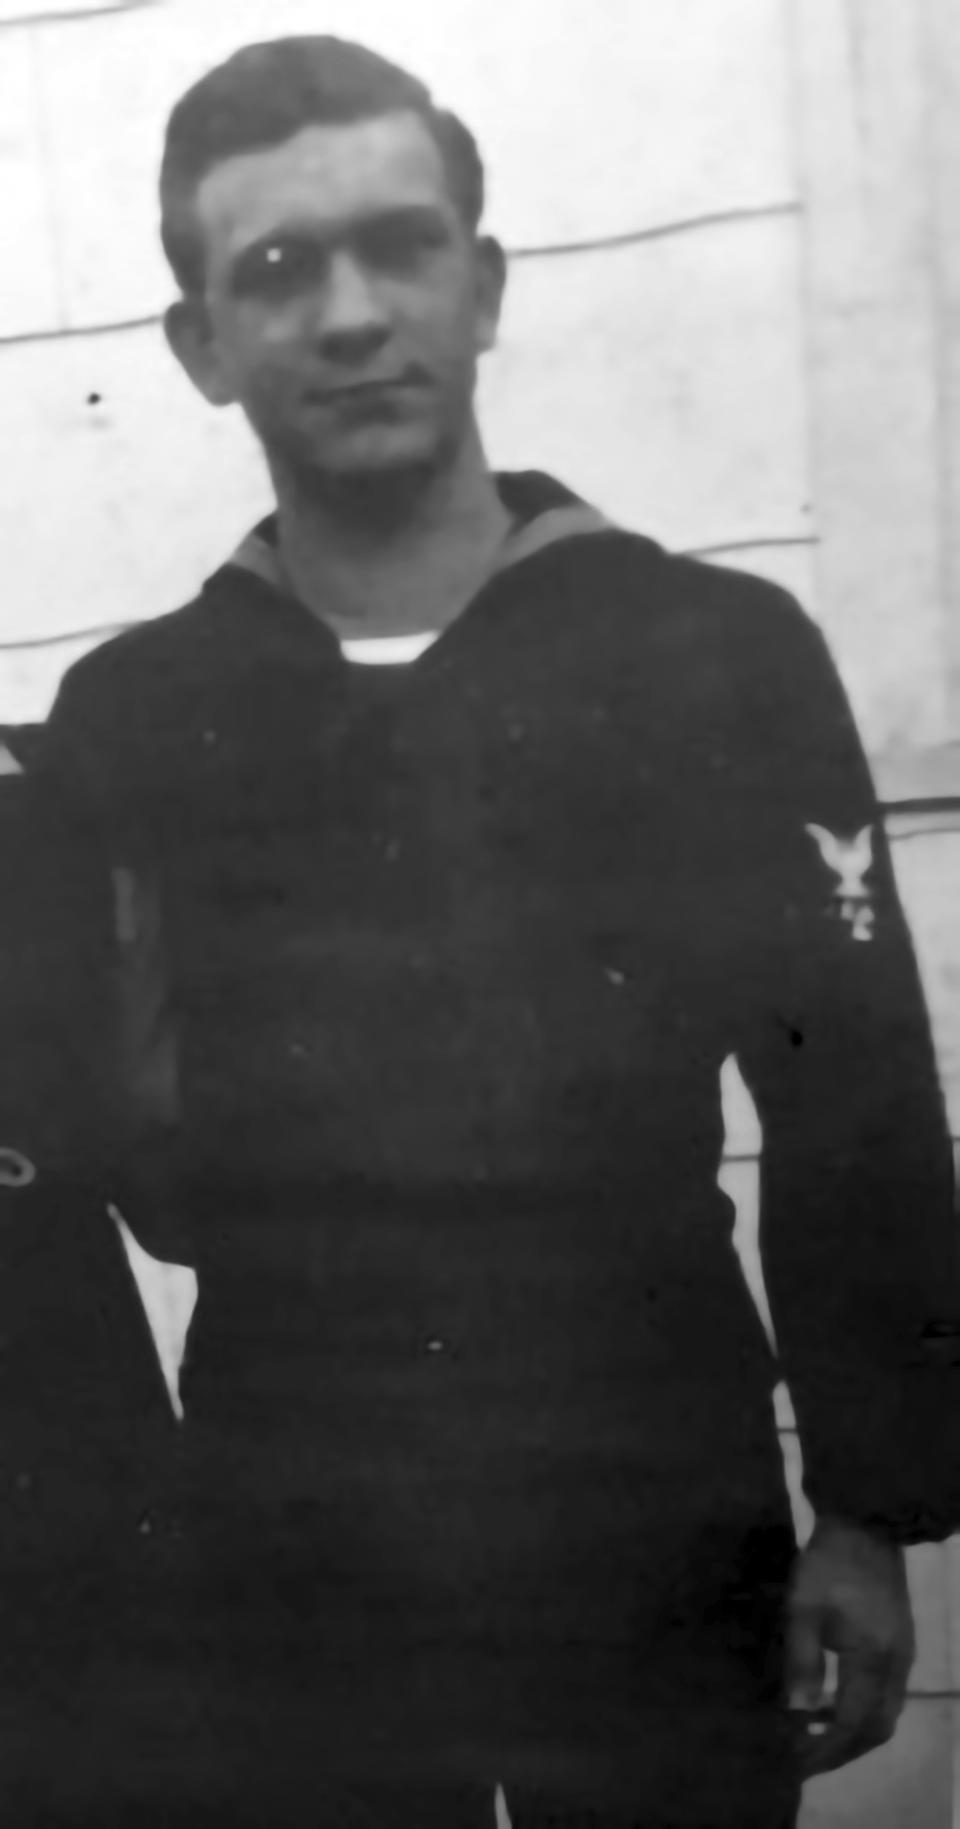 This 1944 photo provided by Debbie Hodges shows Julian Hodges in his Navy uniform in Lewiston, Mont. Julian Hodges, now of Johnson City, Tenn., is believed to be one of the last two men alive of the 4,600 servicemen who between 1937 and 1942 served aboard the USS Yorktown, an aircraft carrier sunk by a Japanese submarine following the June 1942 Battle of Midway. (Courtesy of Debbie Hodges via AP)